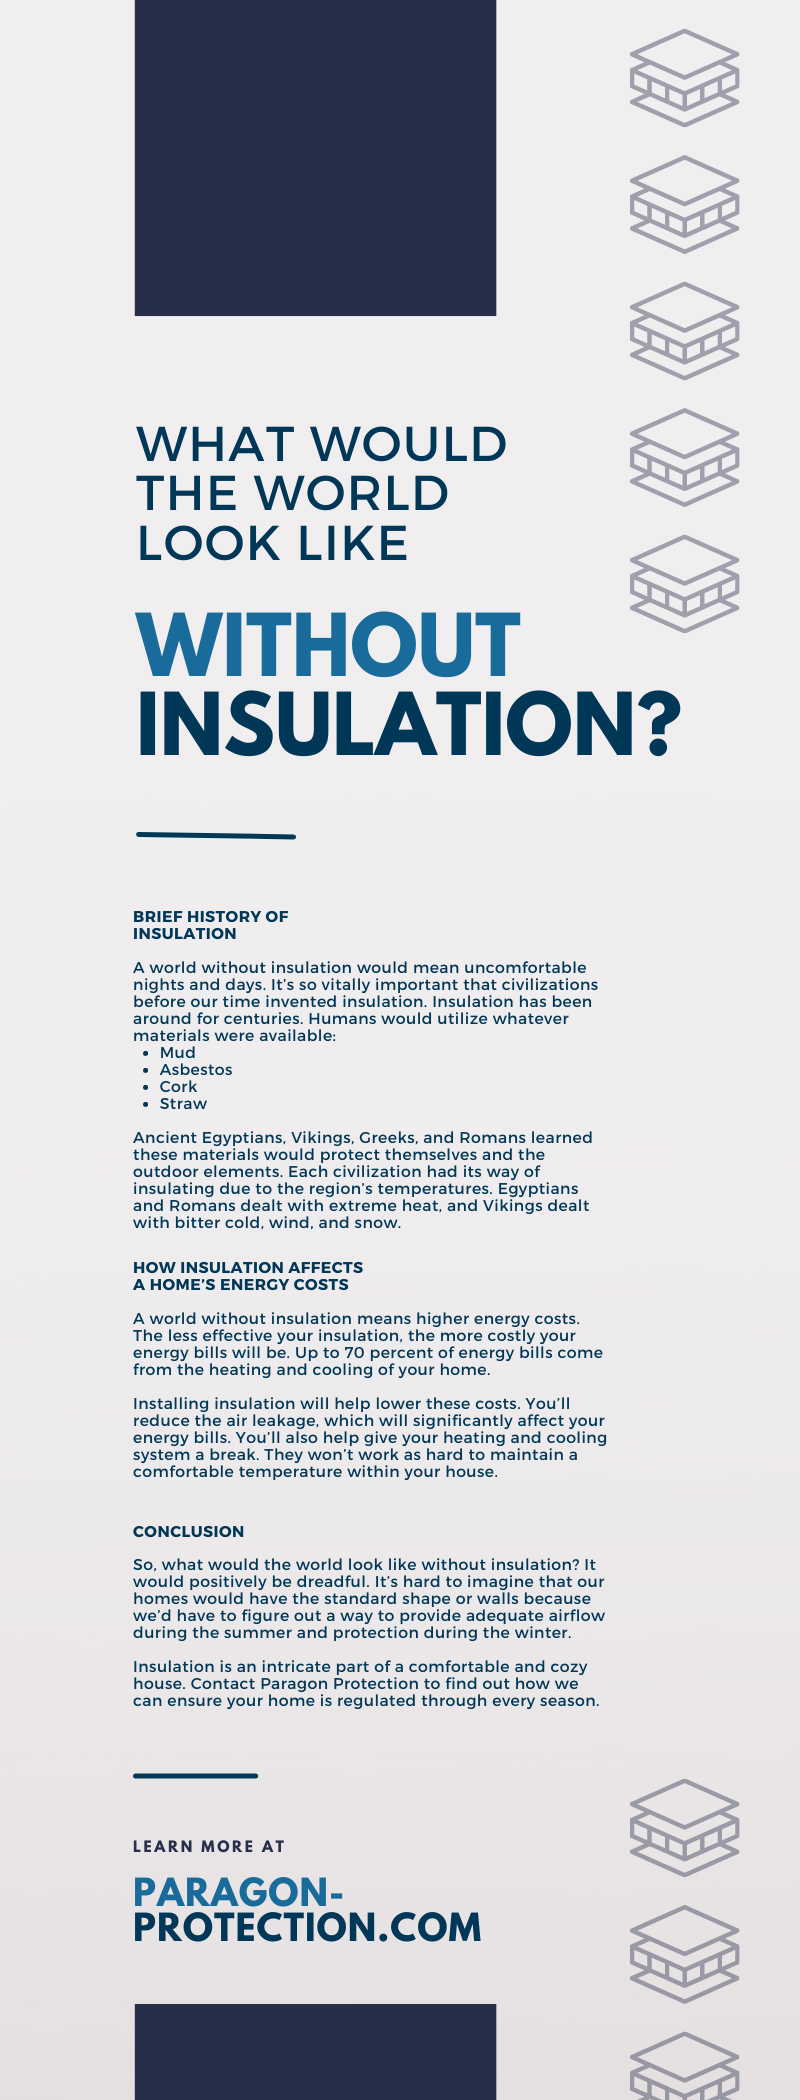 What Would the World Look Like Without Insulation?